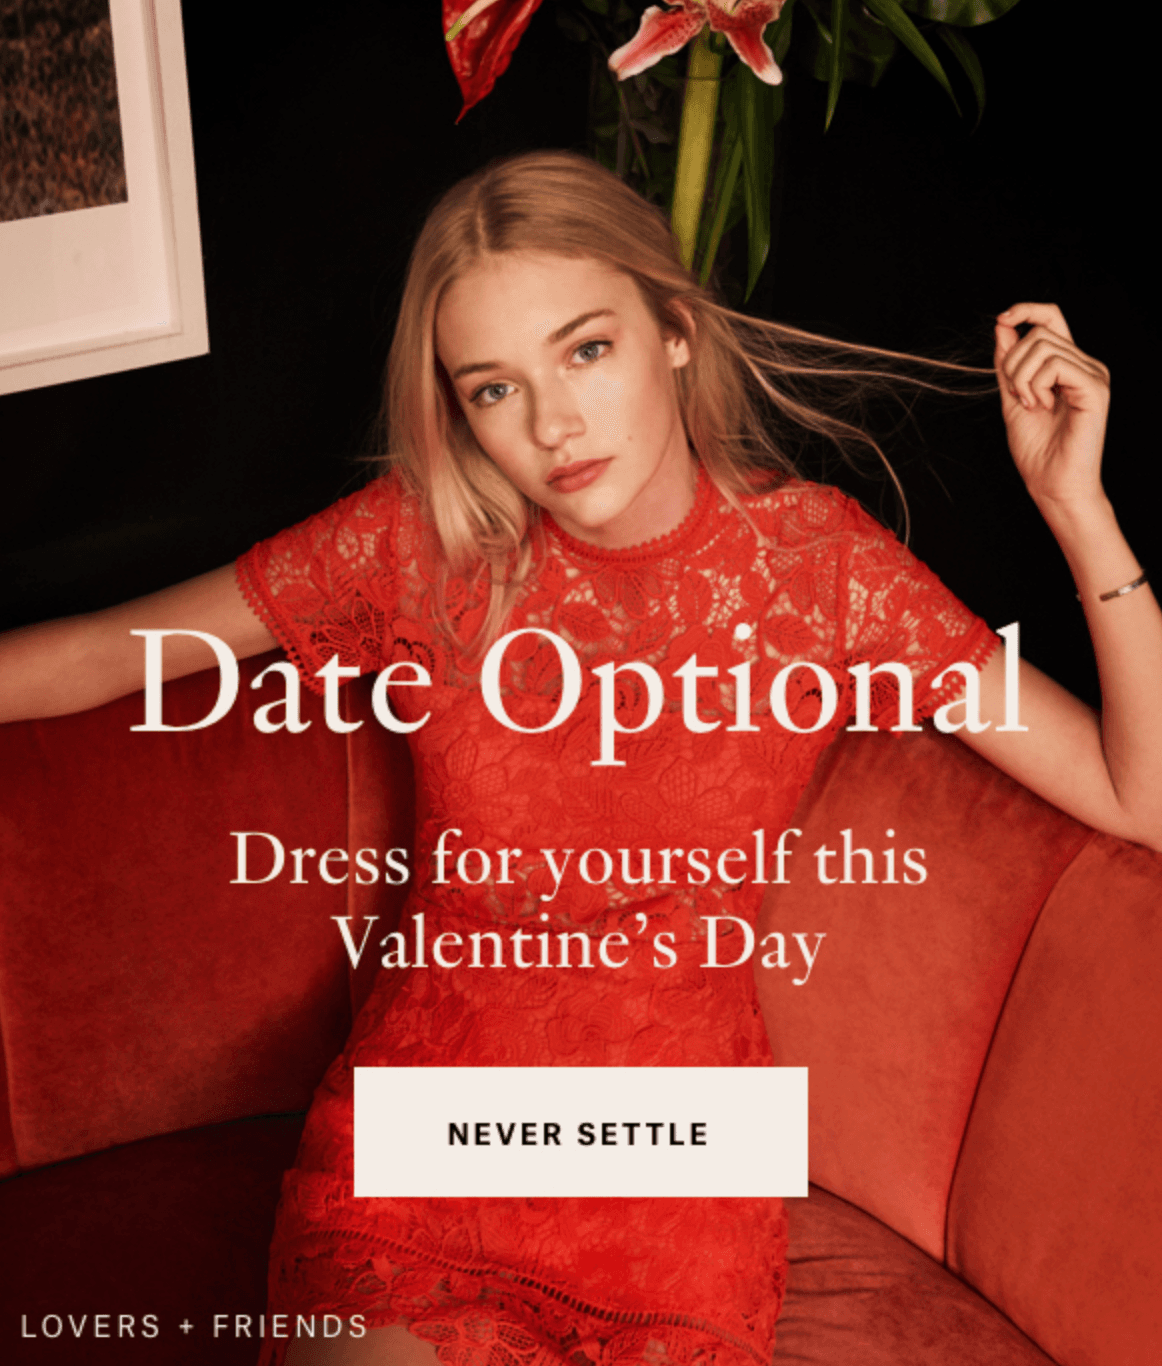 15 Vibrant Valentine’s Day Marketing Ideas: How To Celebrate Love In 2023